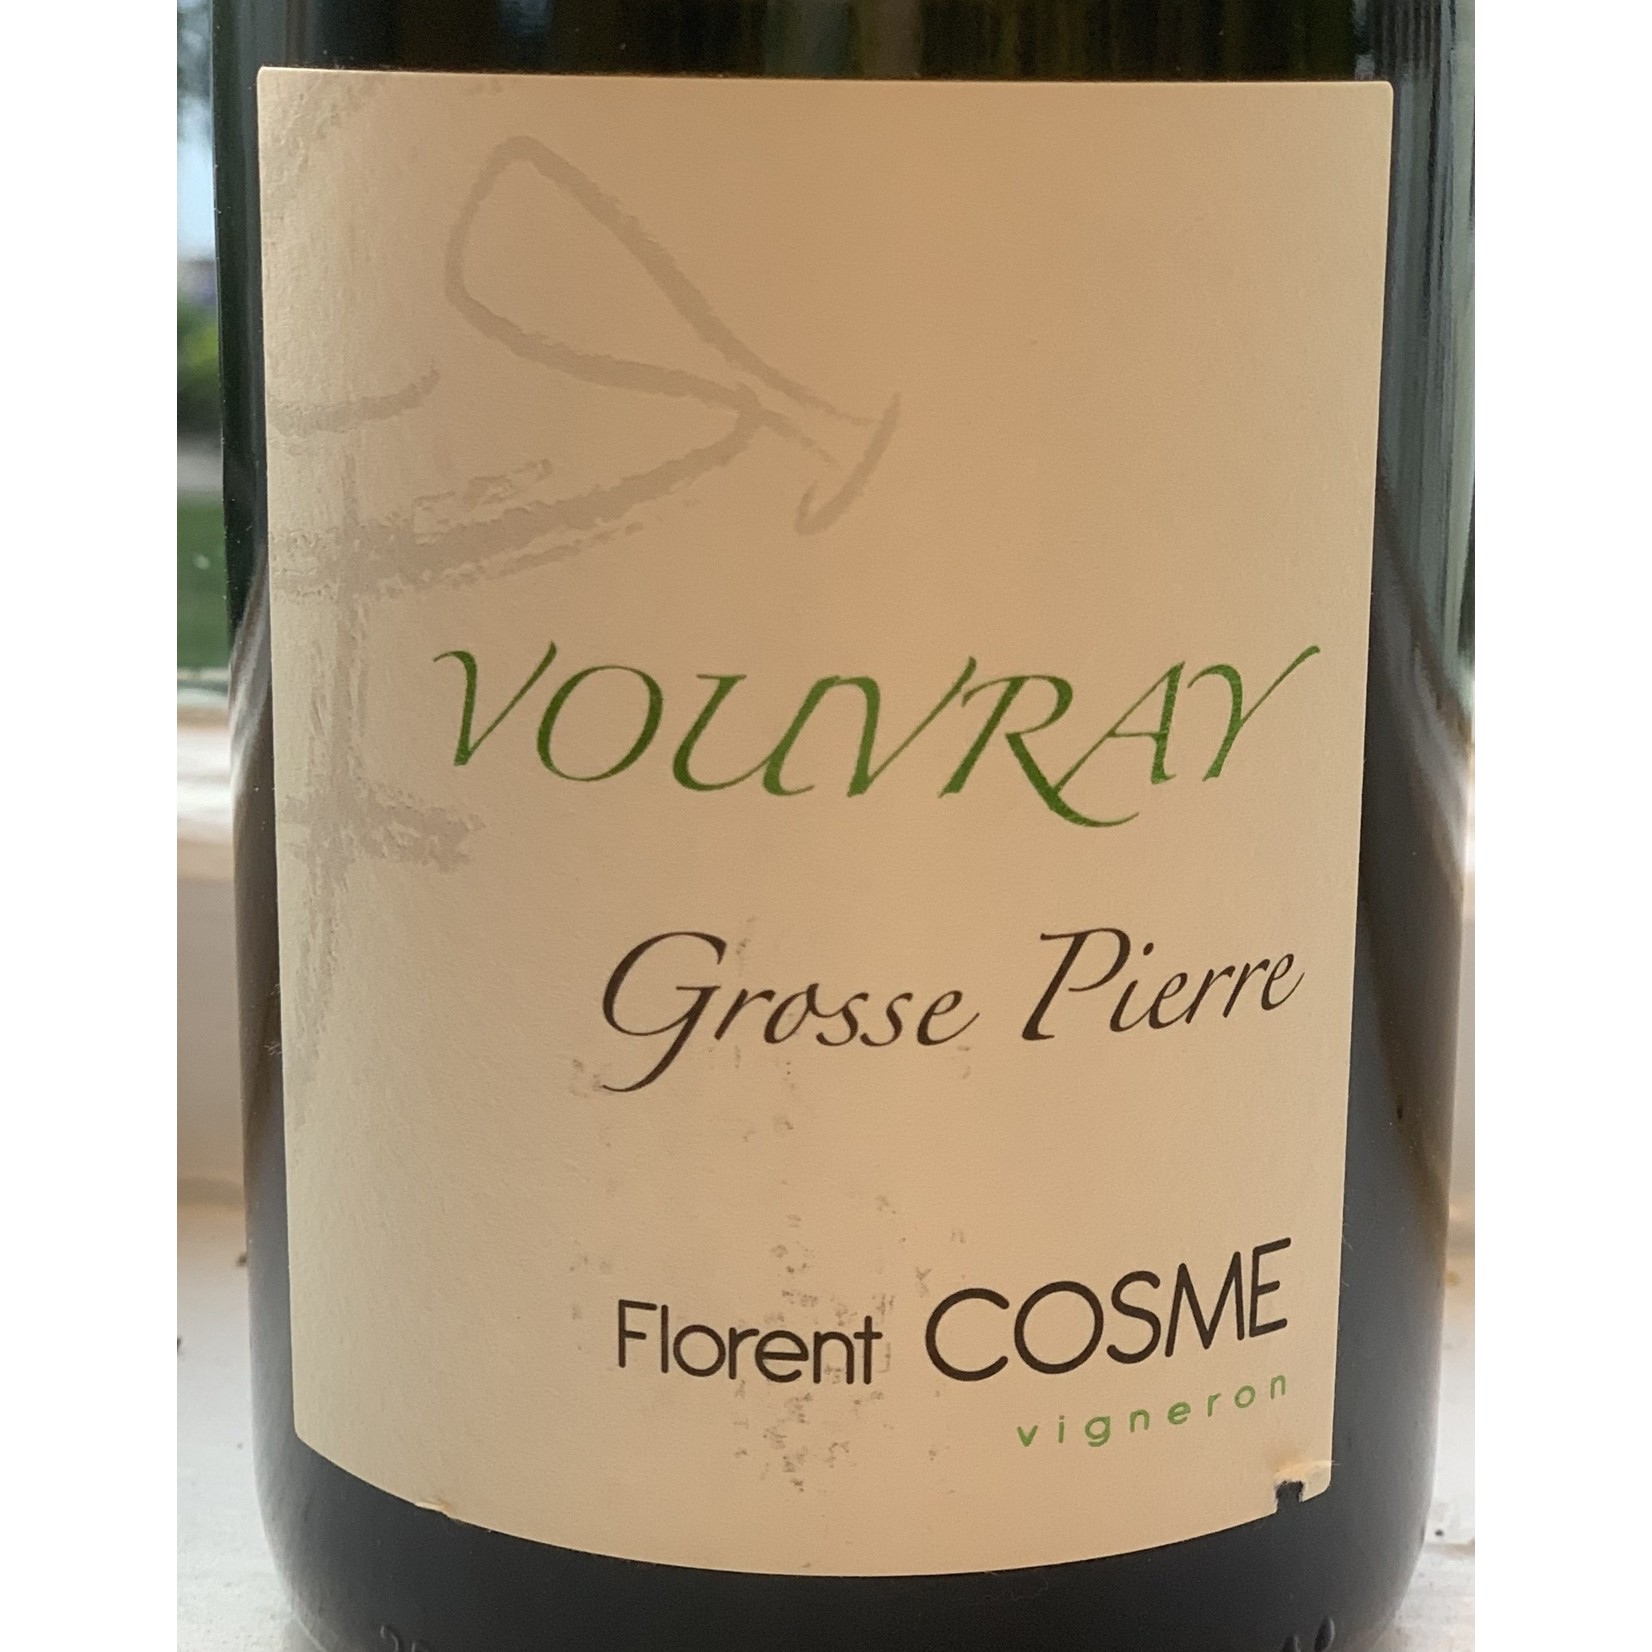 Florent Cosme "Grosse Pierre" Vouvray, Loire Valley, France 2020